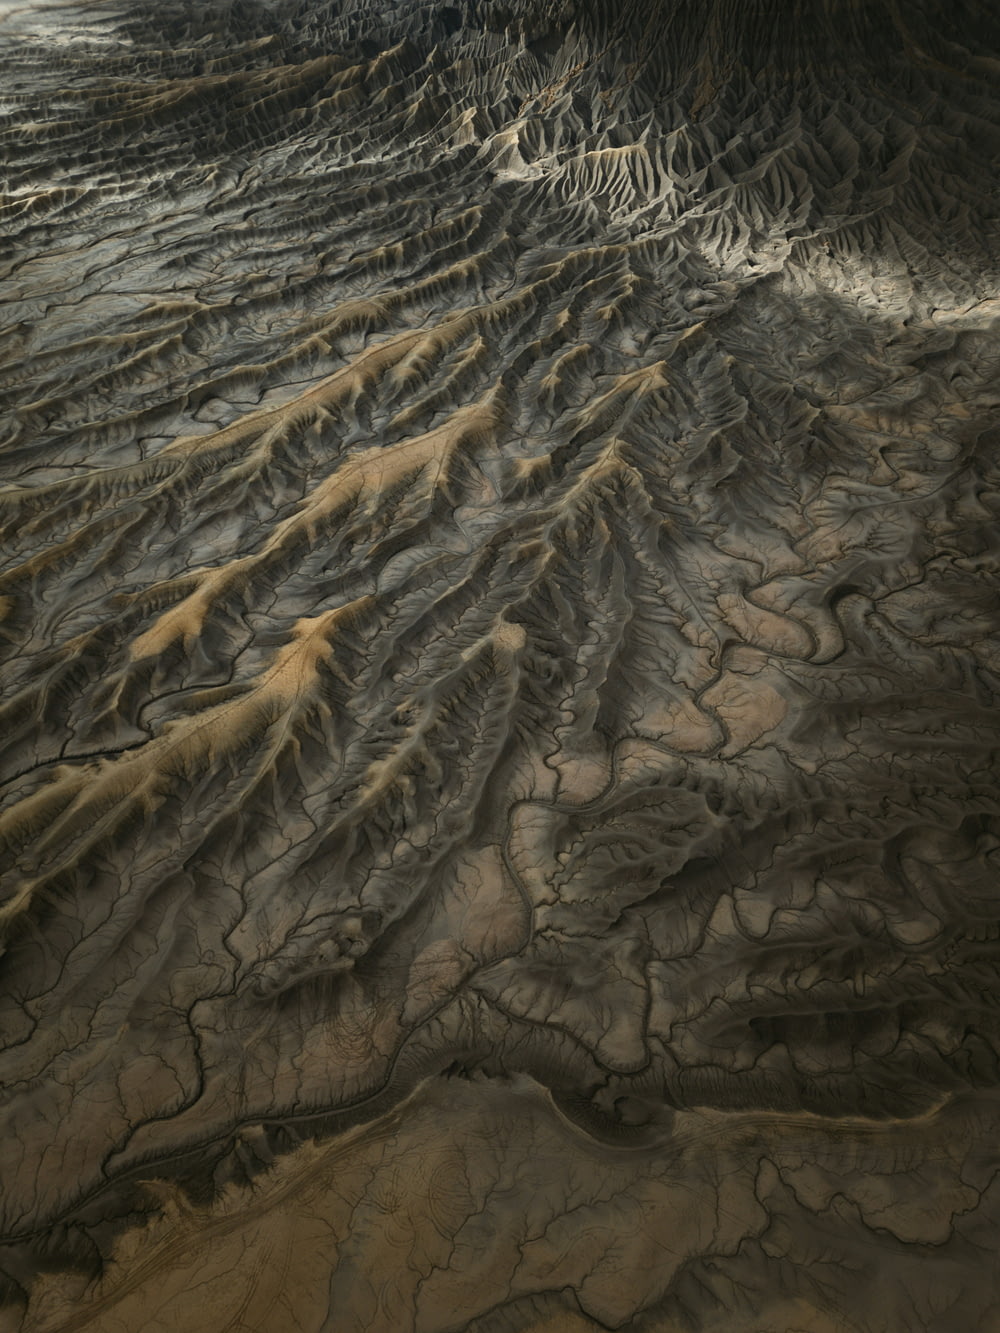 an aerial view of a desert landscape with a mountain in the background